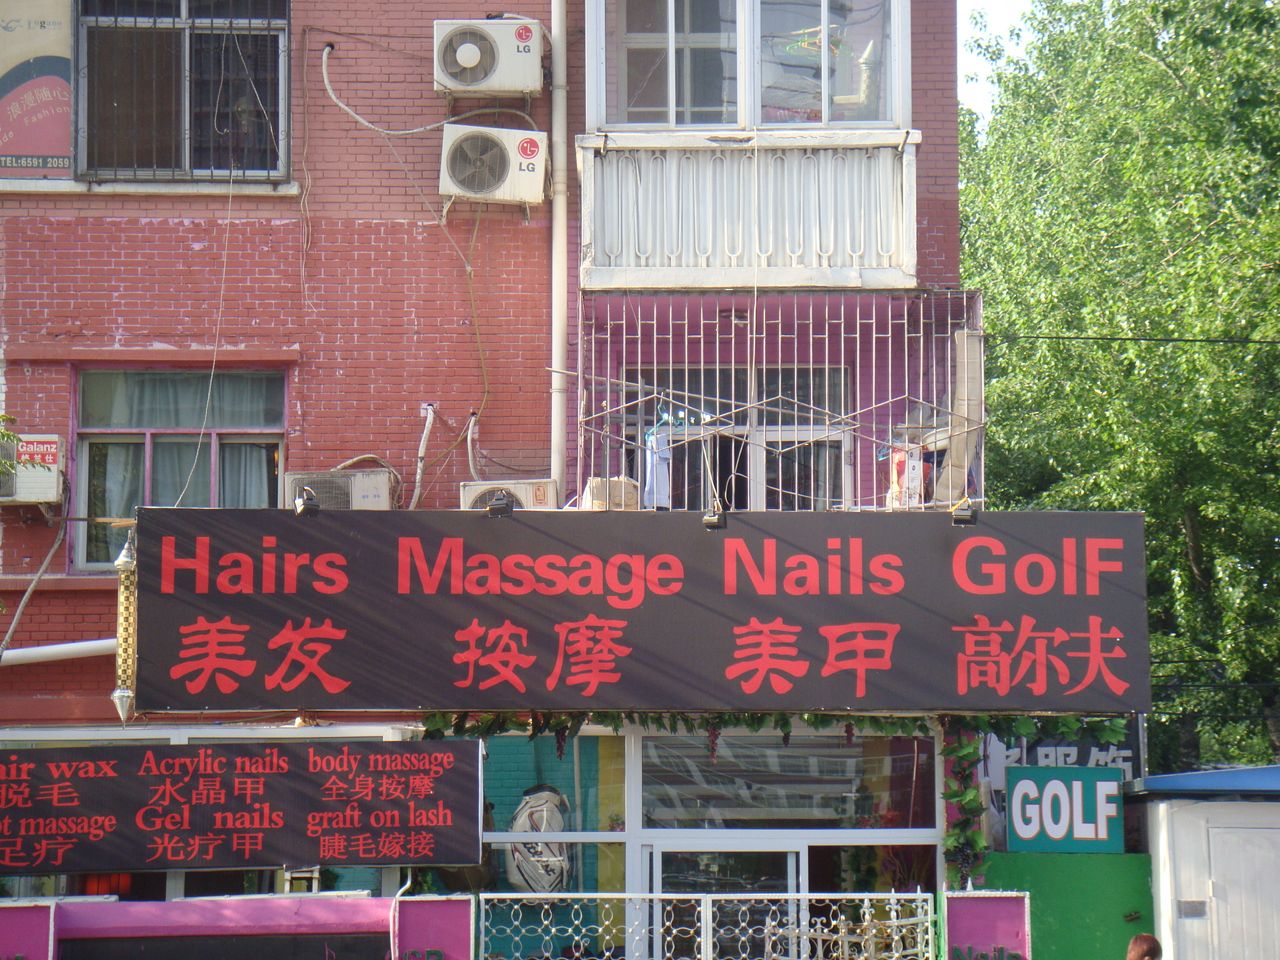 Chinese hair salon sign translated